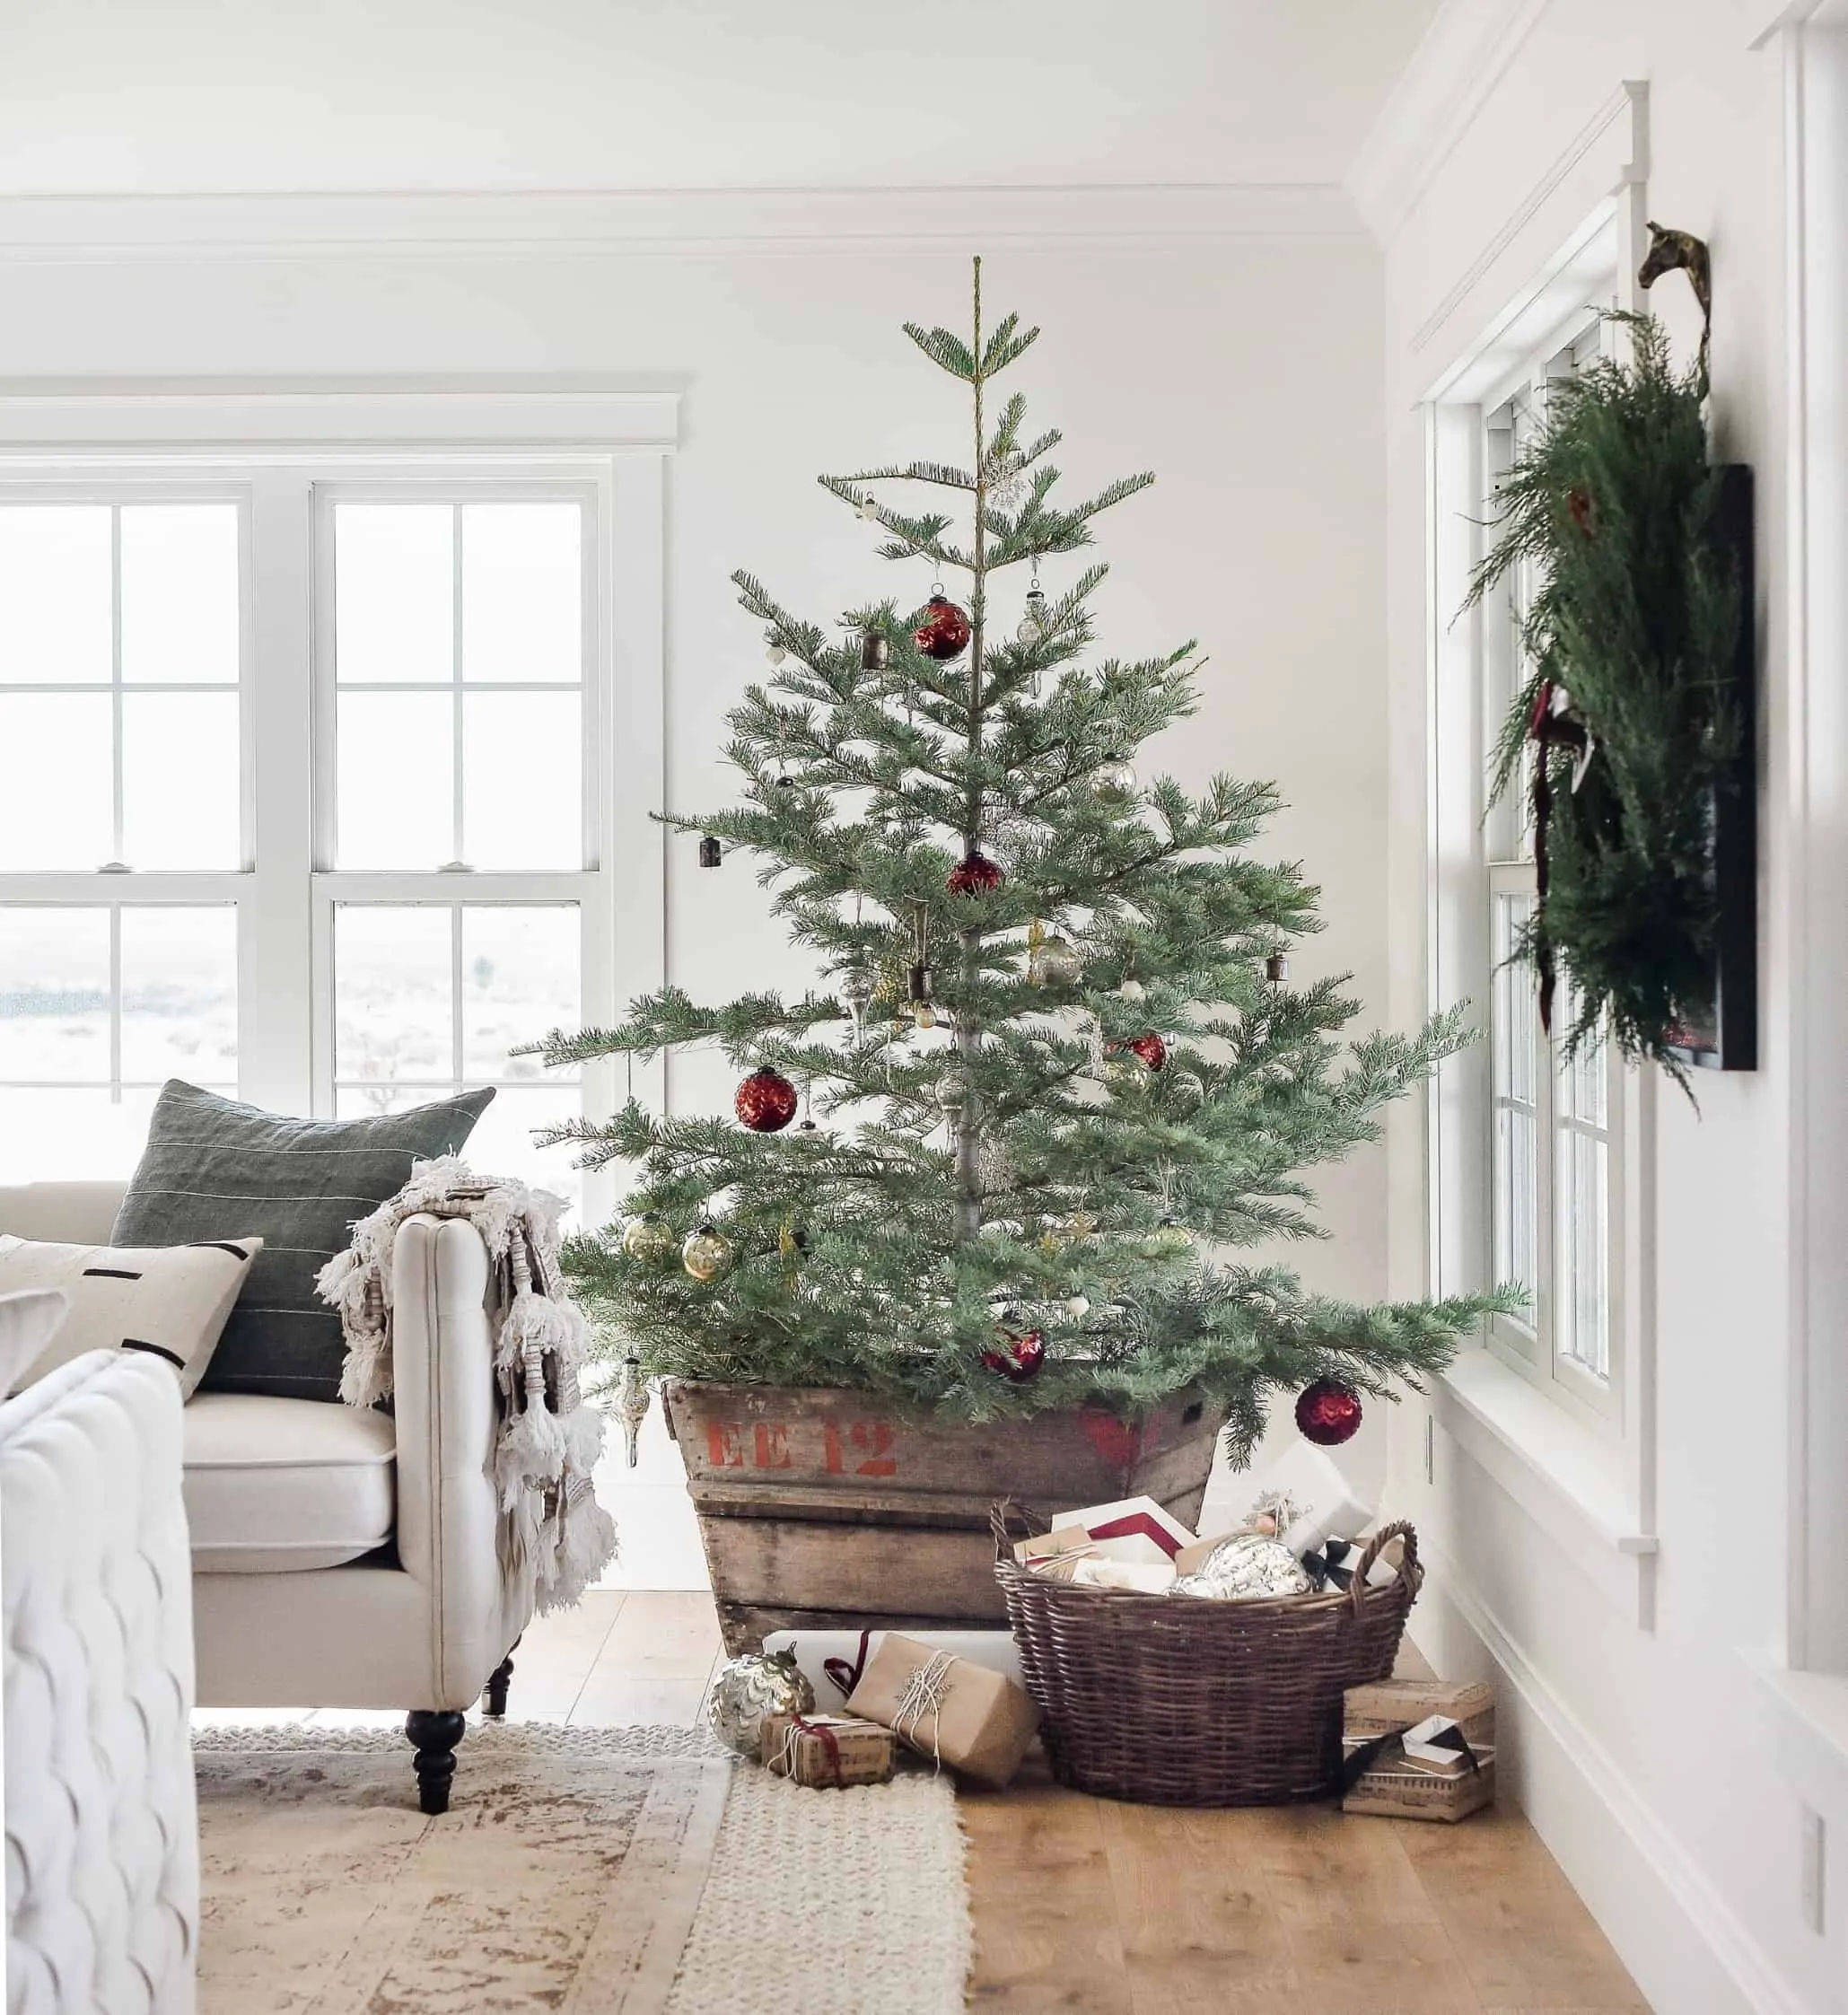 Use vintage Christmas decor this holiday season for a modern farmhouse Christmas! With pops of red and deep green, this minimal Christmas decor is anything but boring!